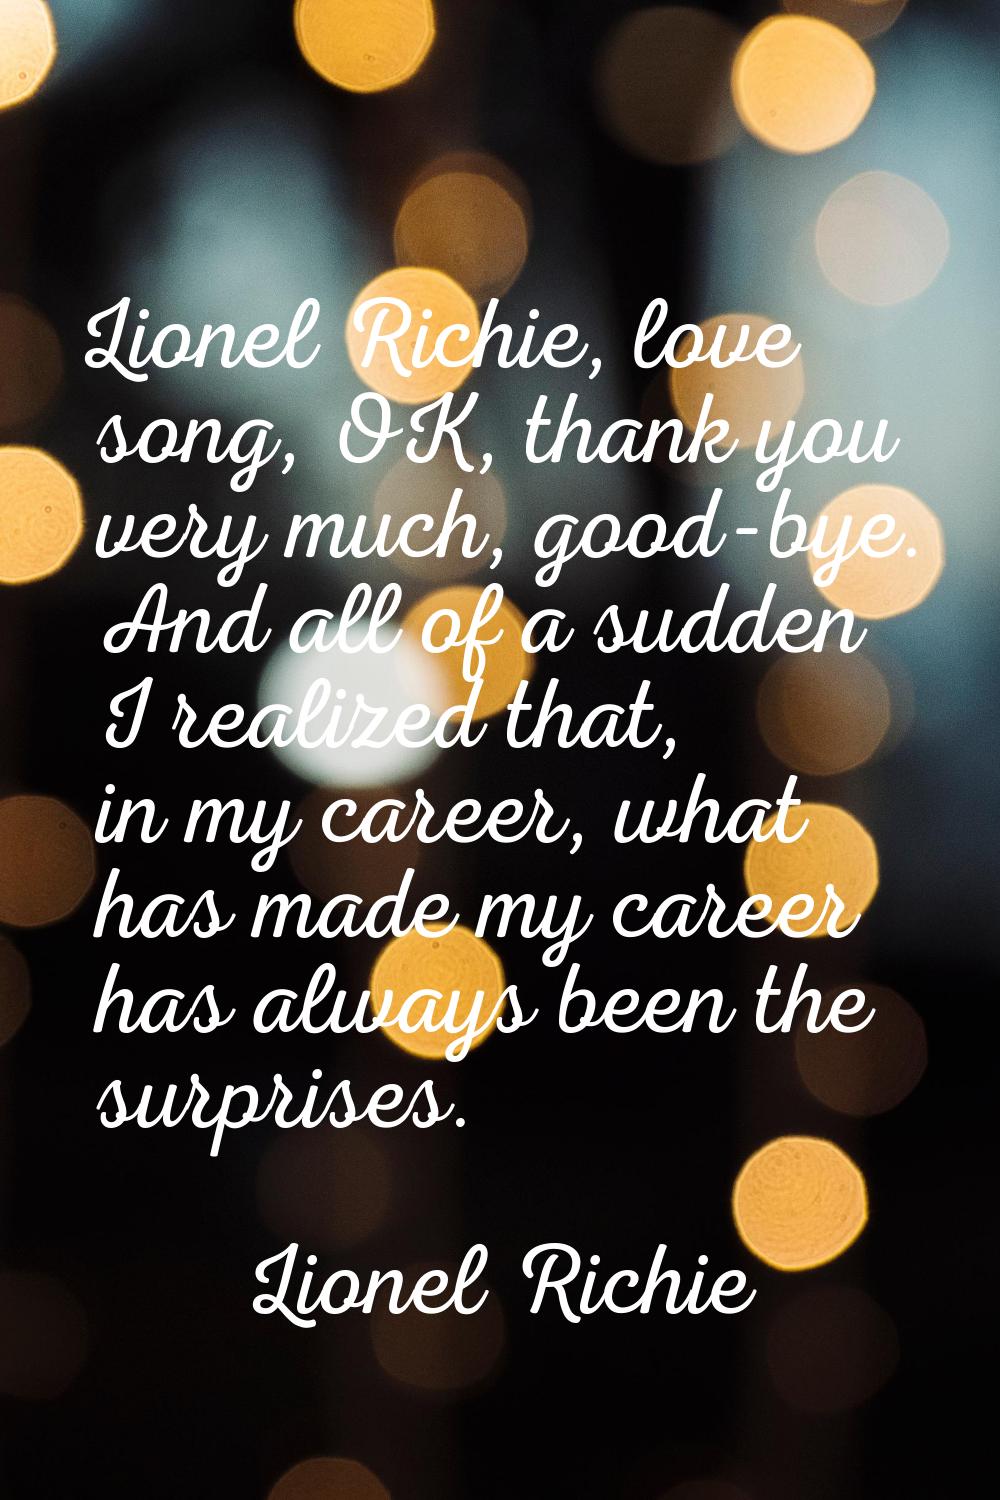 Lionel Richie, love song, OK, thank you very much, good-bye. And all of a sudden I realized that, i